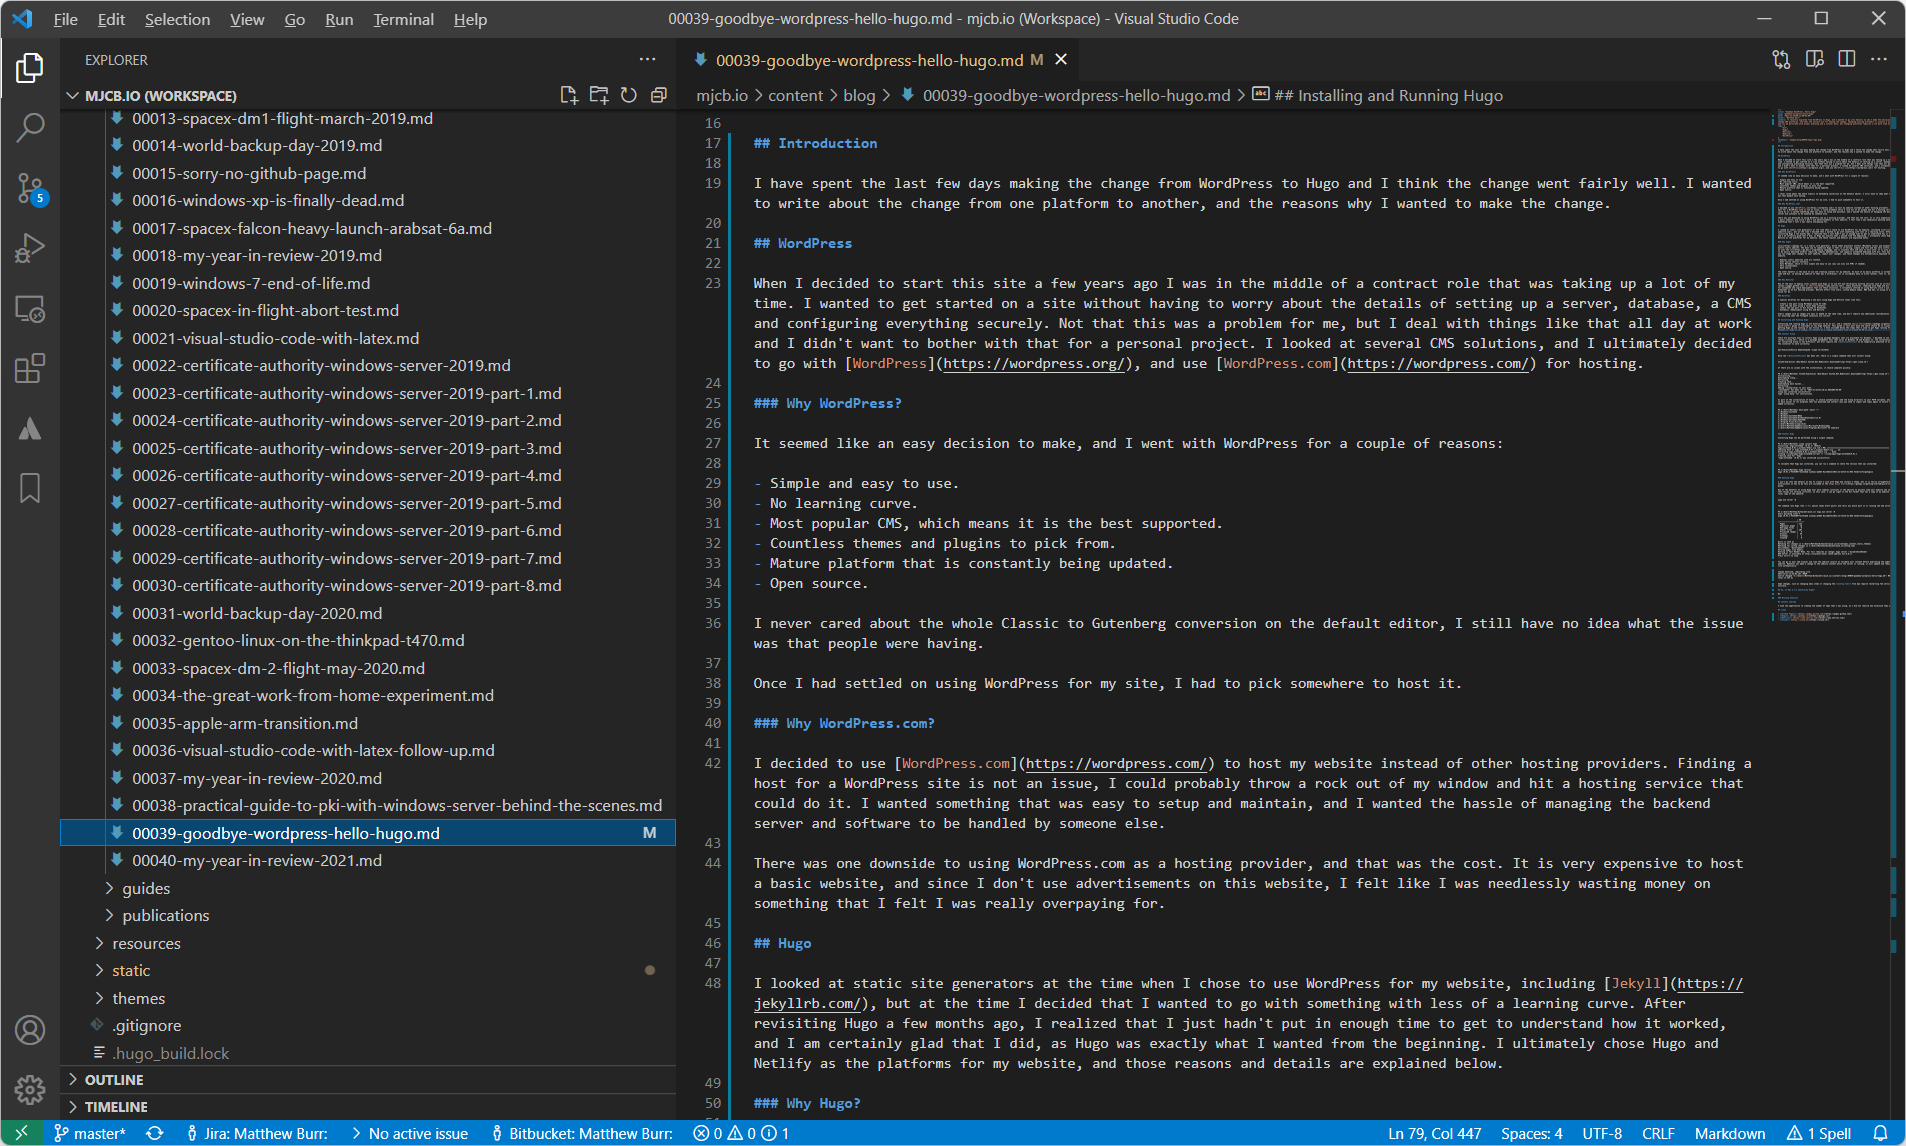 VS Code with my website Workspace.